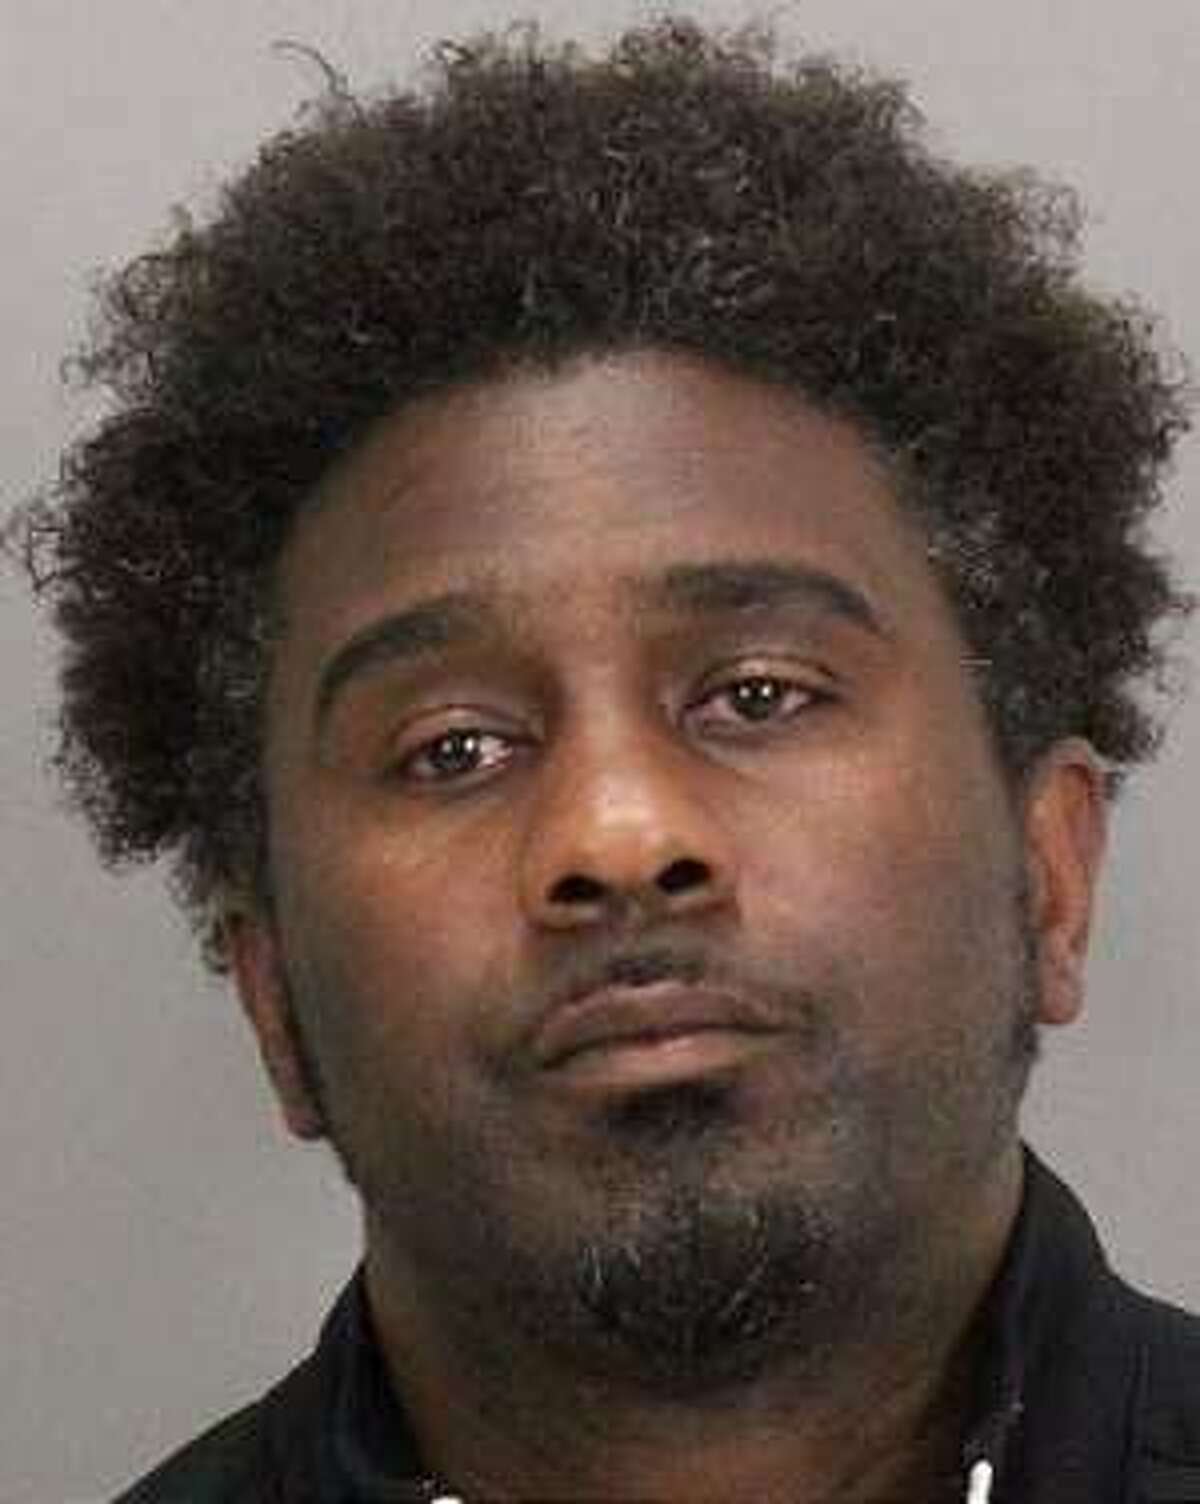 San Jose police arrested 43-year-old Chioke Robinson, a San Francisco resident, on Thursday after multiple victims accused him of sexually assaulting them while they were minors.